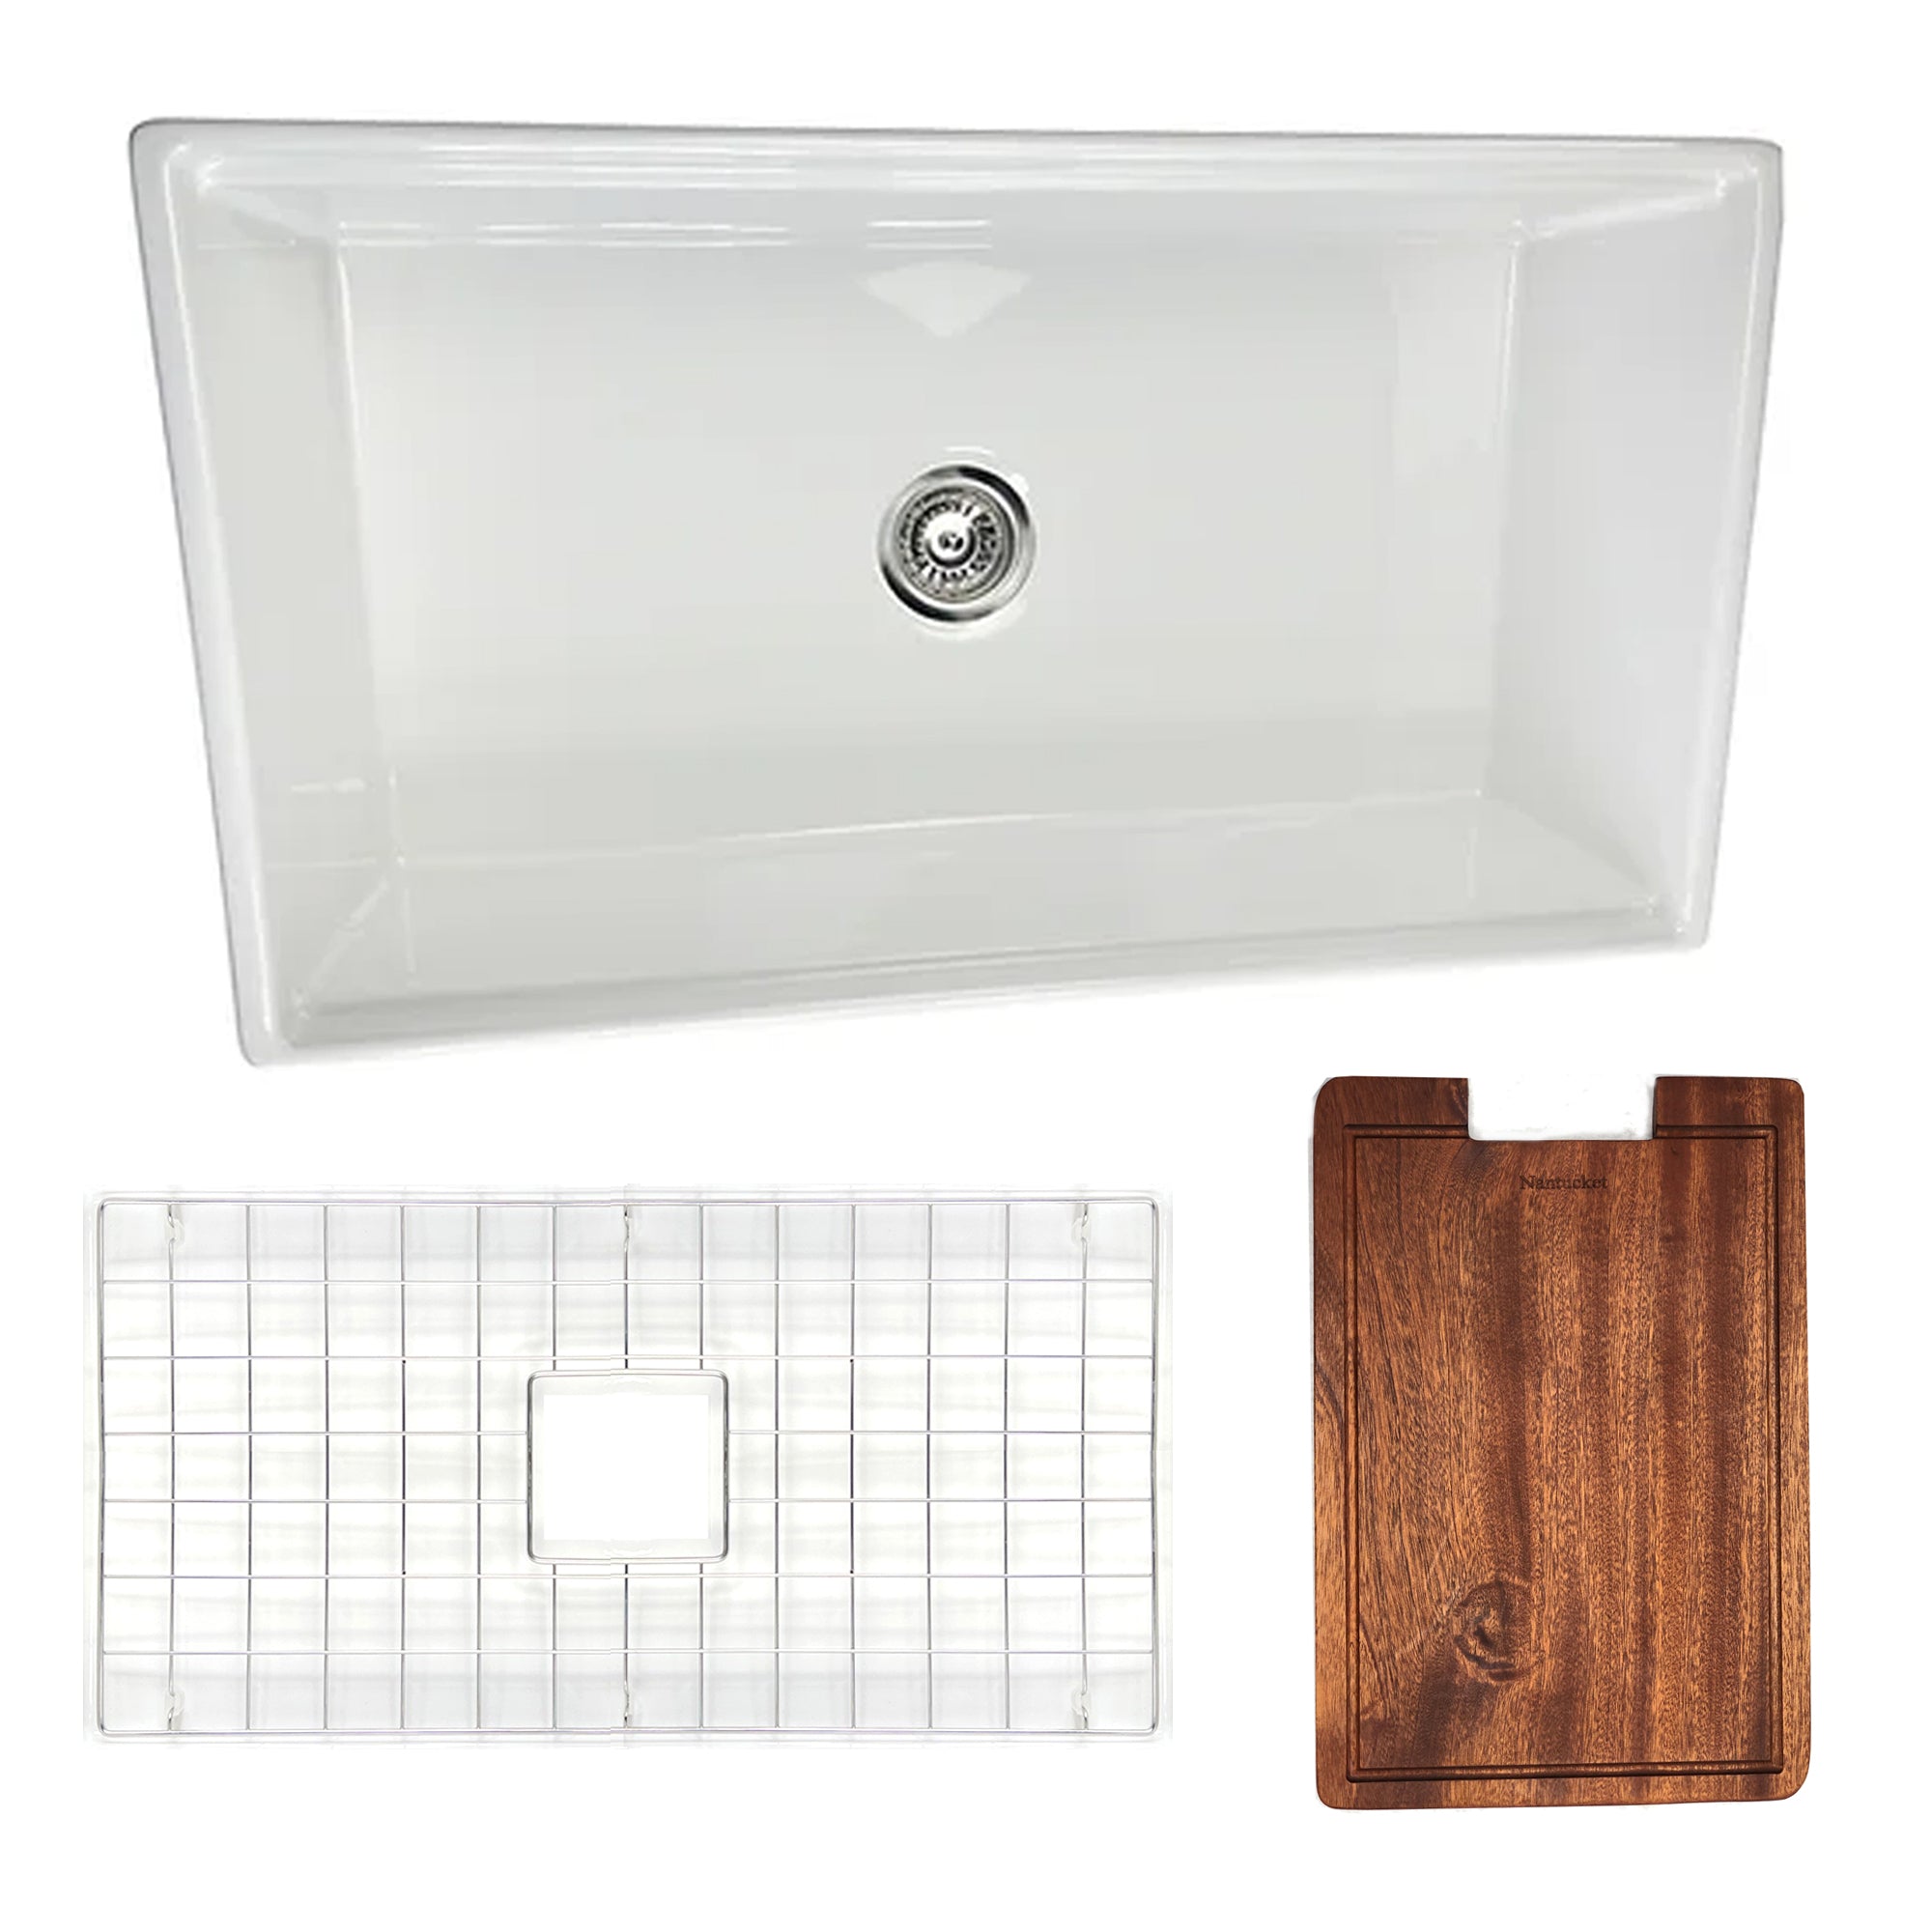 Nantucket Sinks 33 Inch Reversible Workstation Farmhouse Fireclay Sink with Accessories